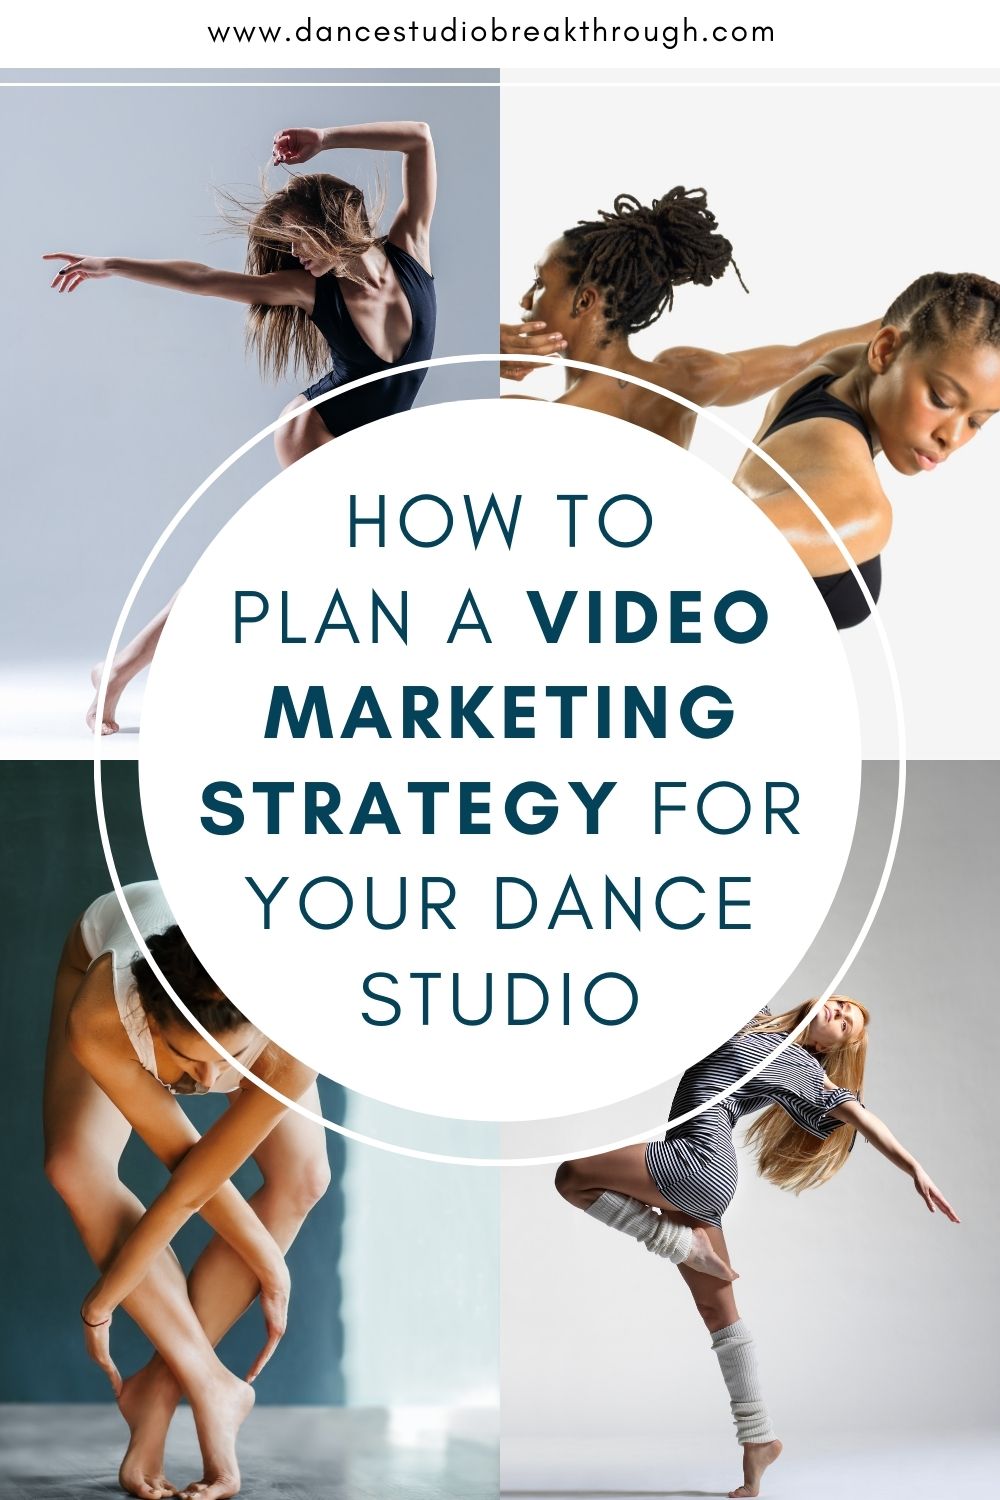 How to create a video marketing plan for your dance studio